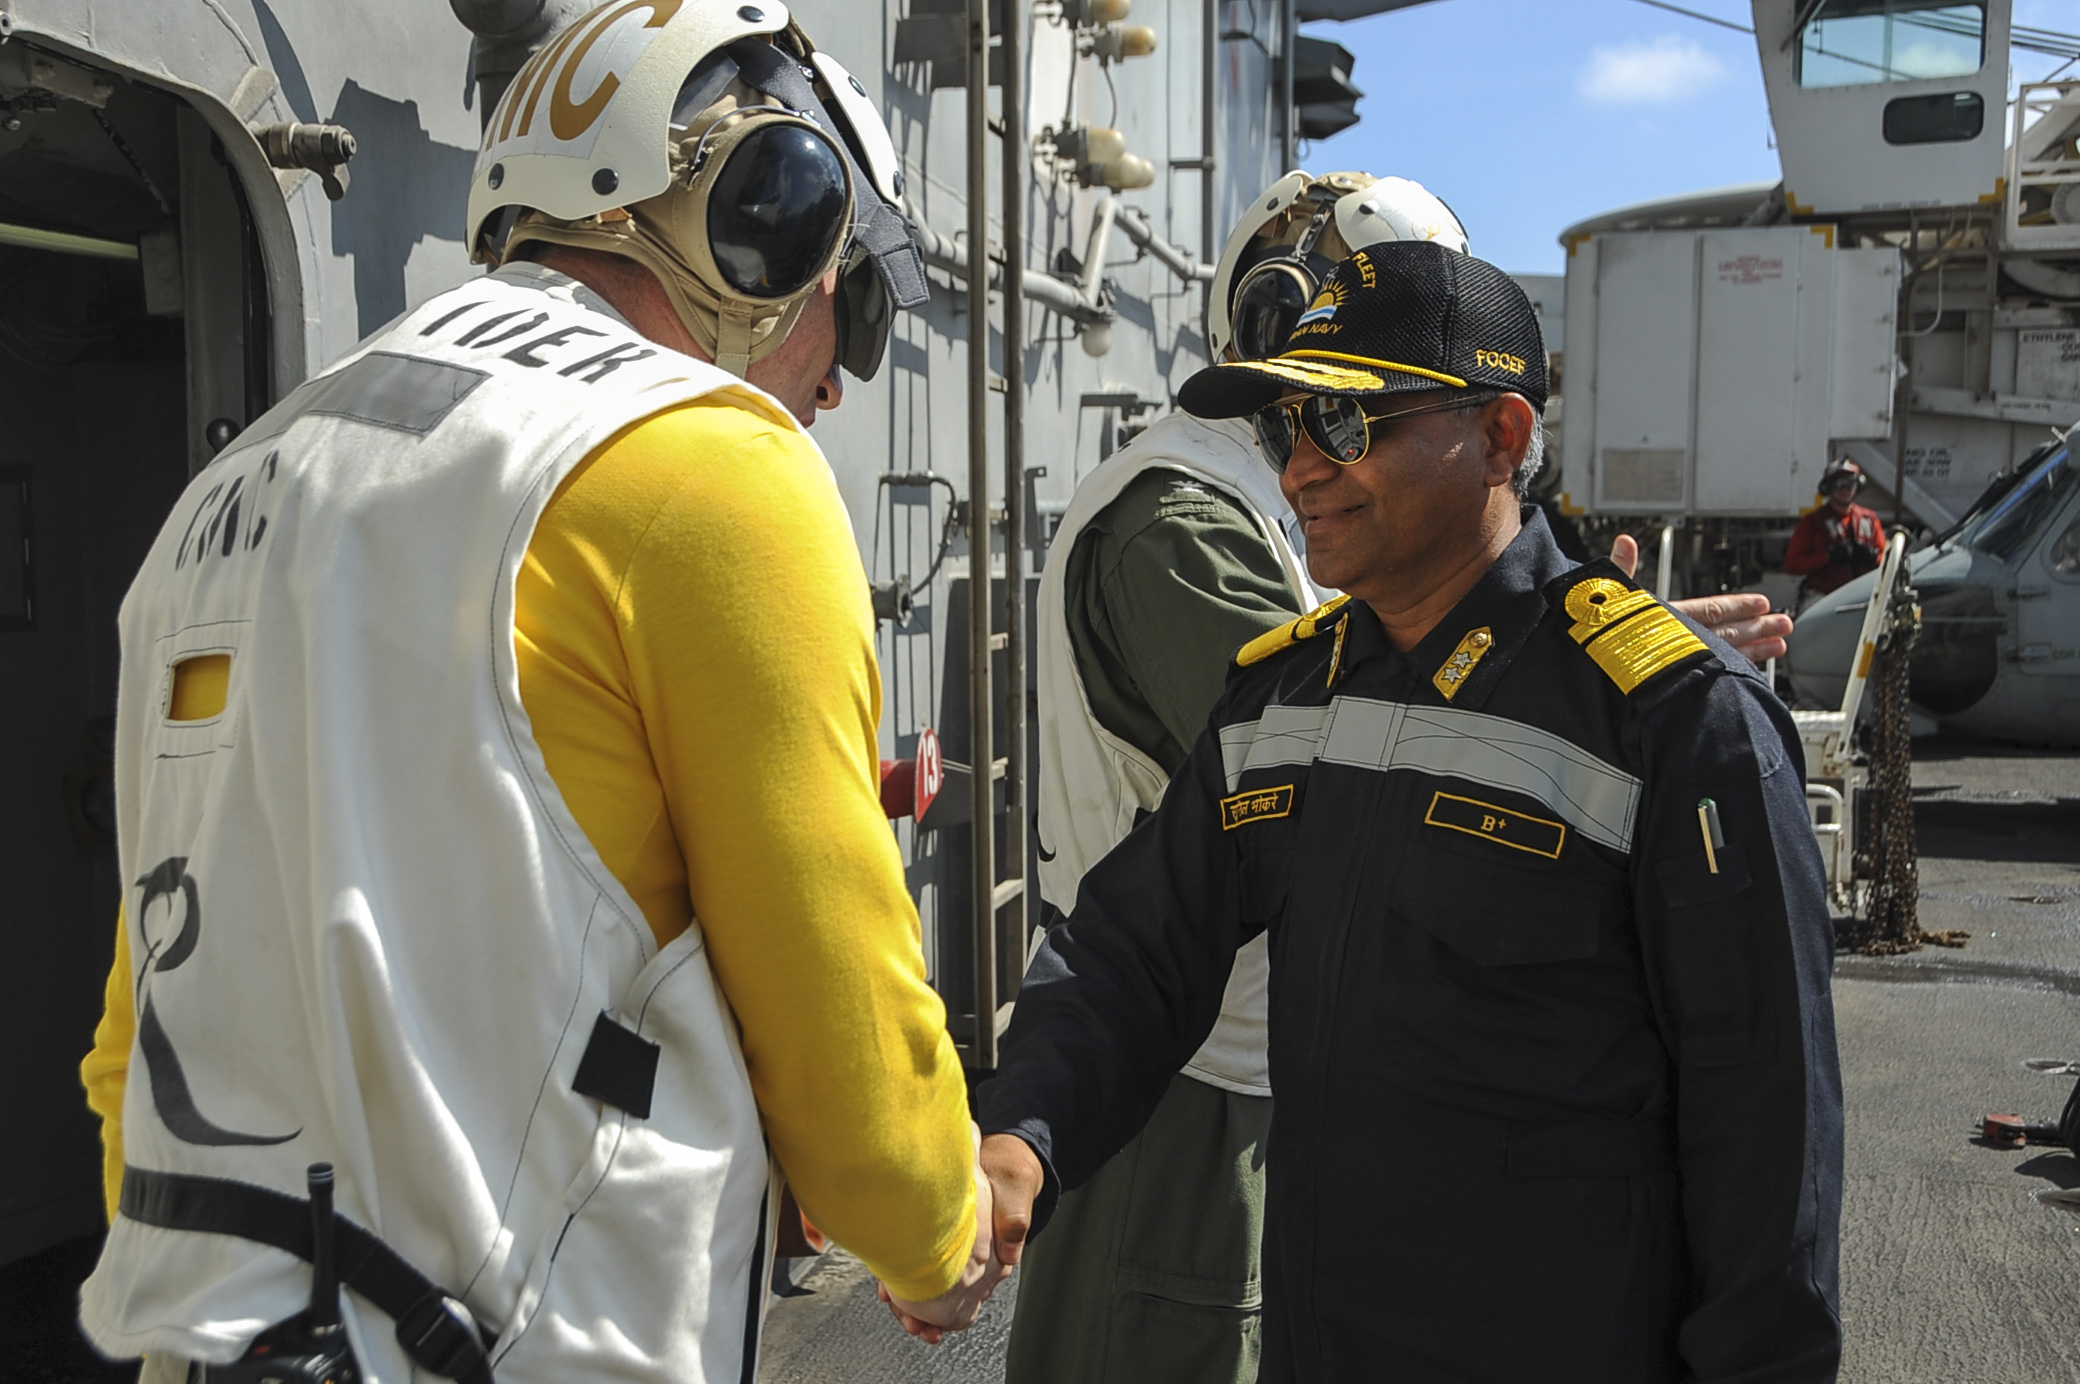 Command master chief of the aircraft carrier USS Theodore Roosevelt (CVN-71), greets Rear Adm. SV Bhokare, Flag Officer Commanding Eastern Fleet, Indian Navy as part of Exercise Malabar 2015. US Navy Photo